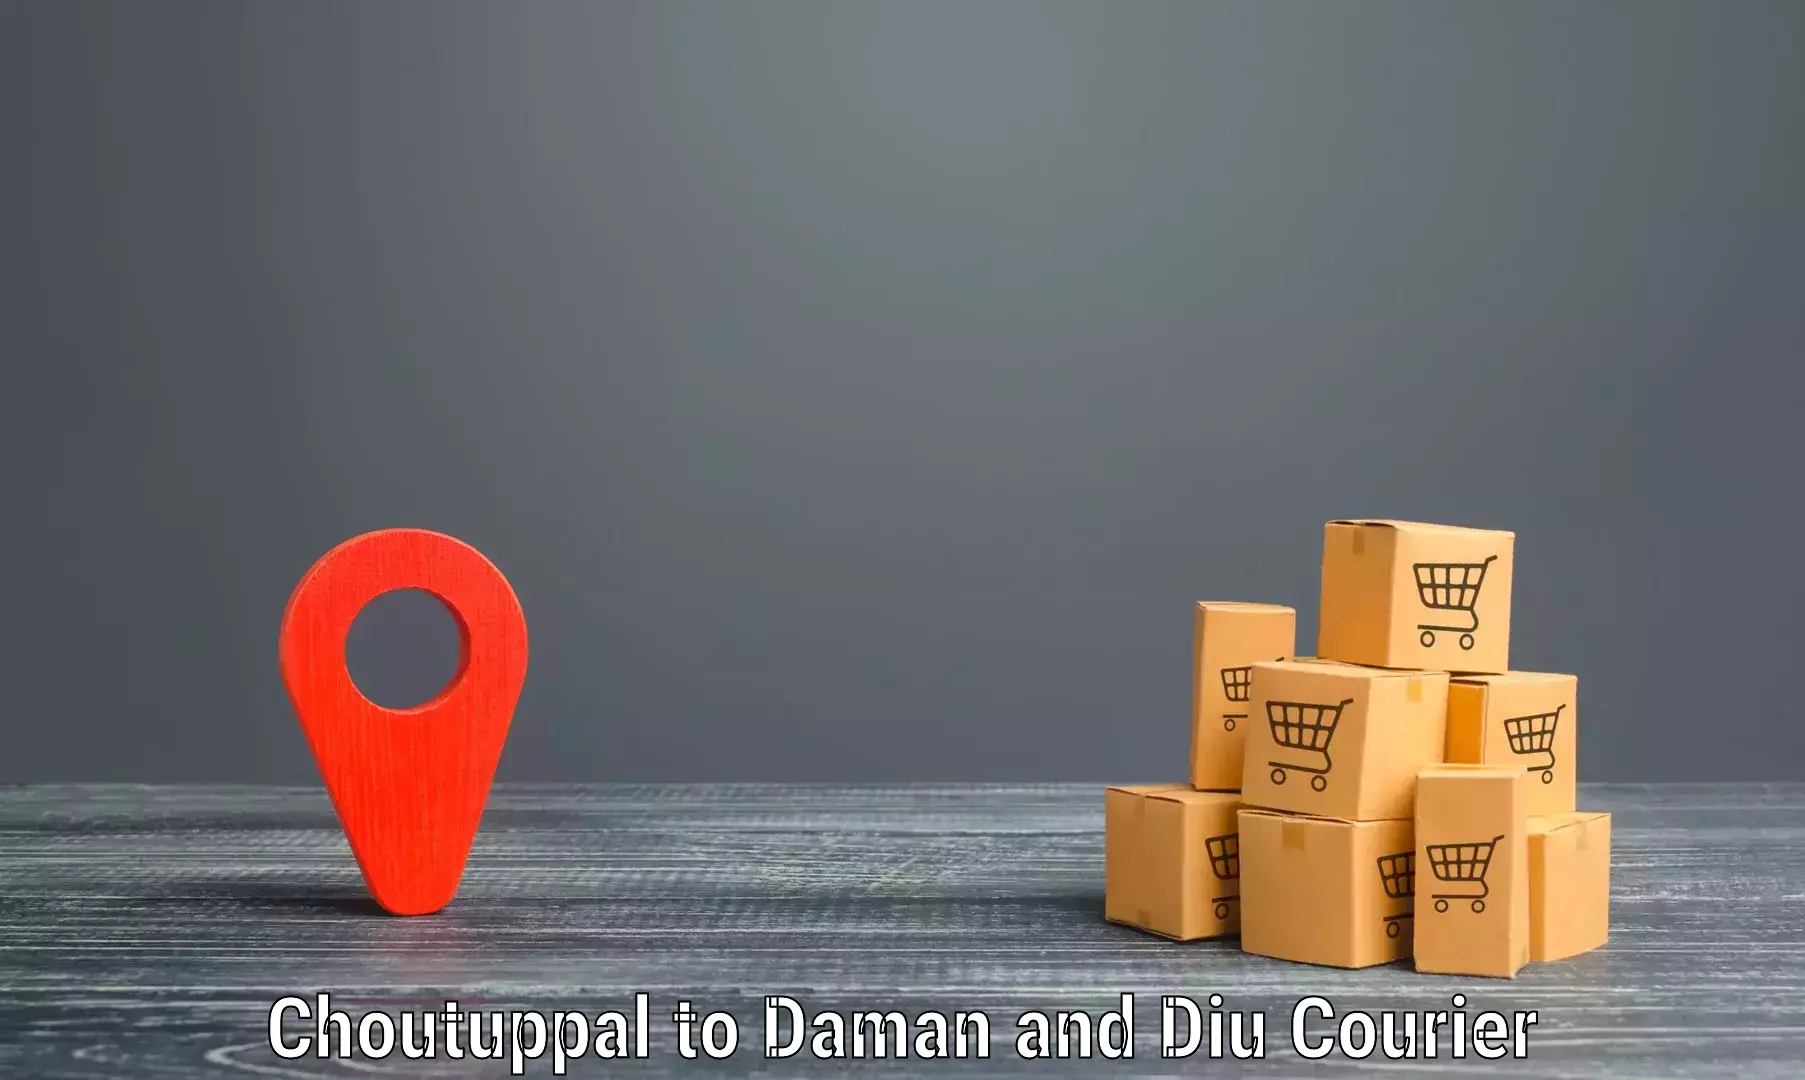 State-of-the-art courier technology Choutuppal to Daman and Diu